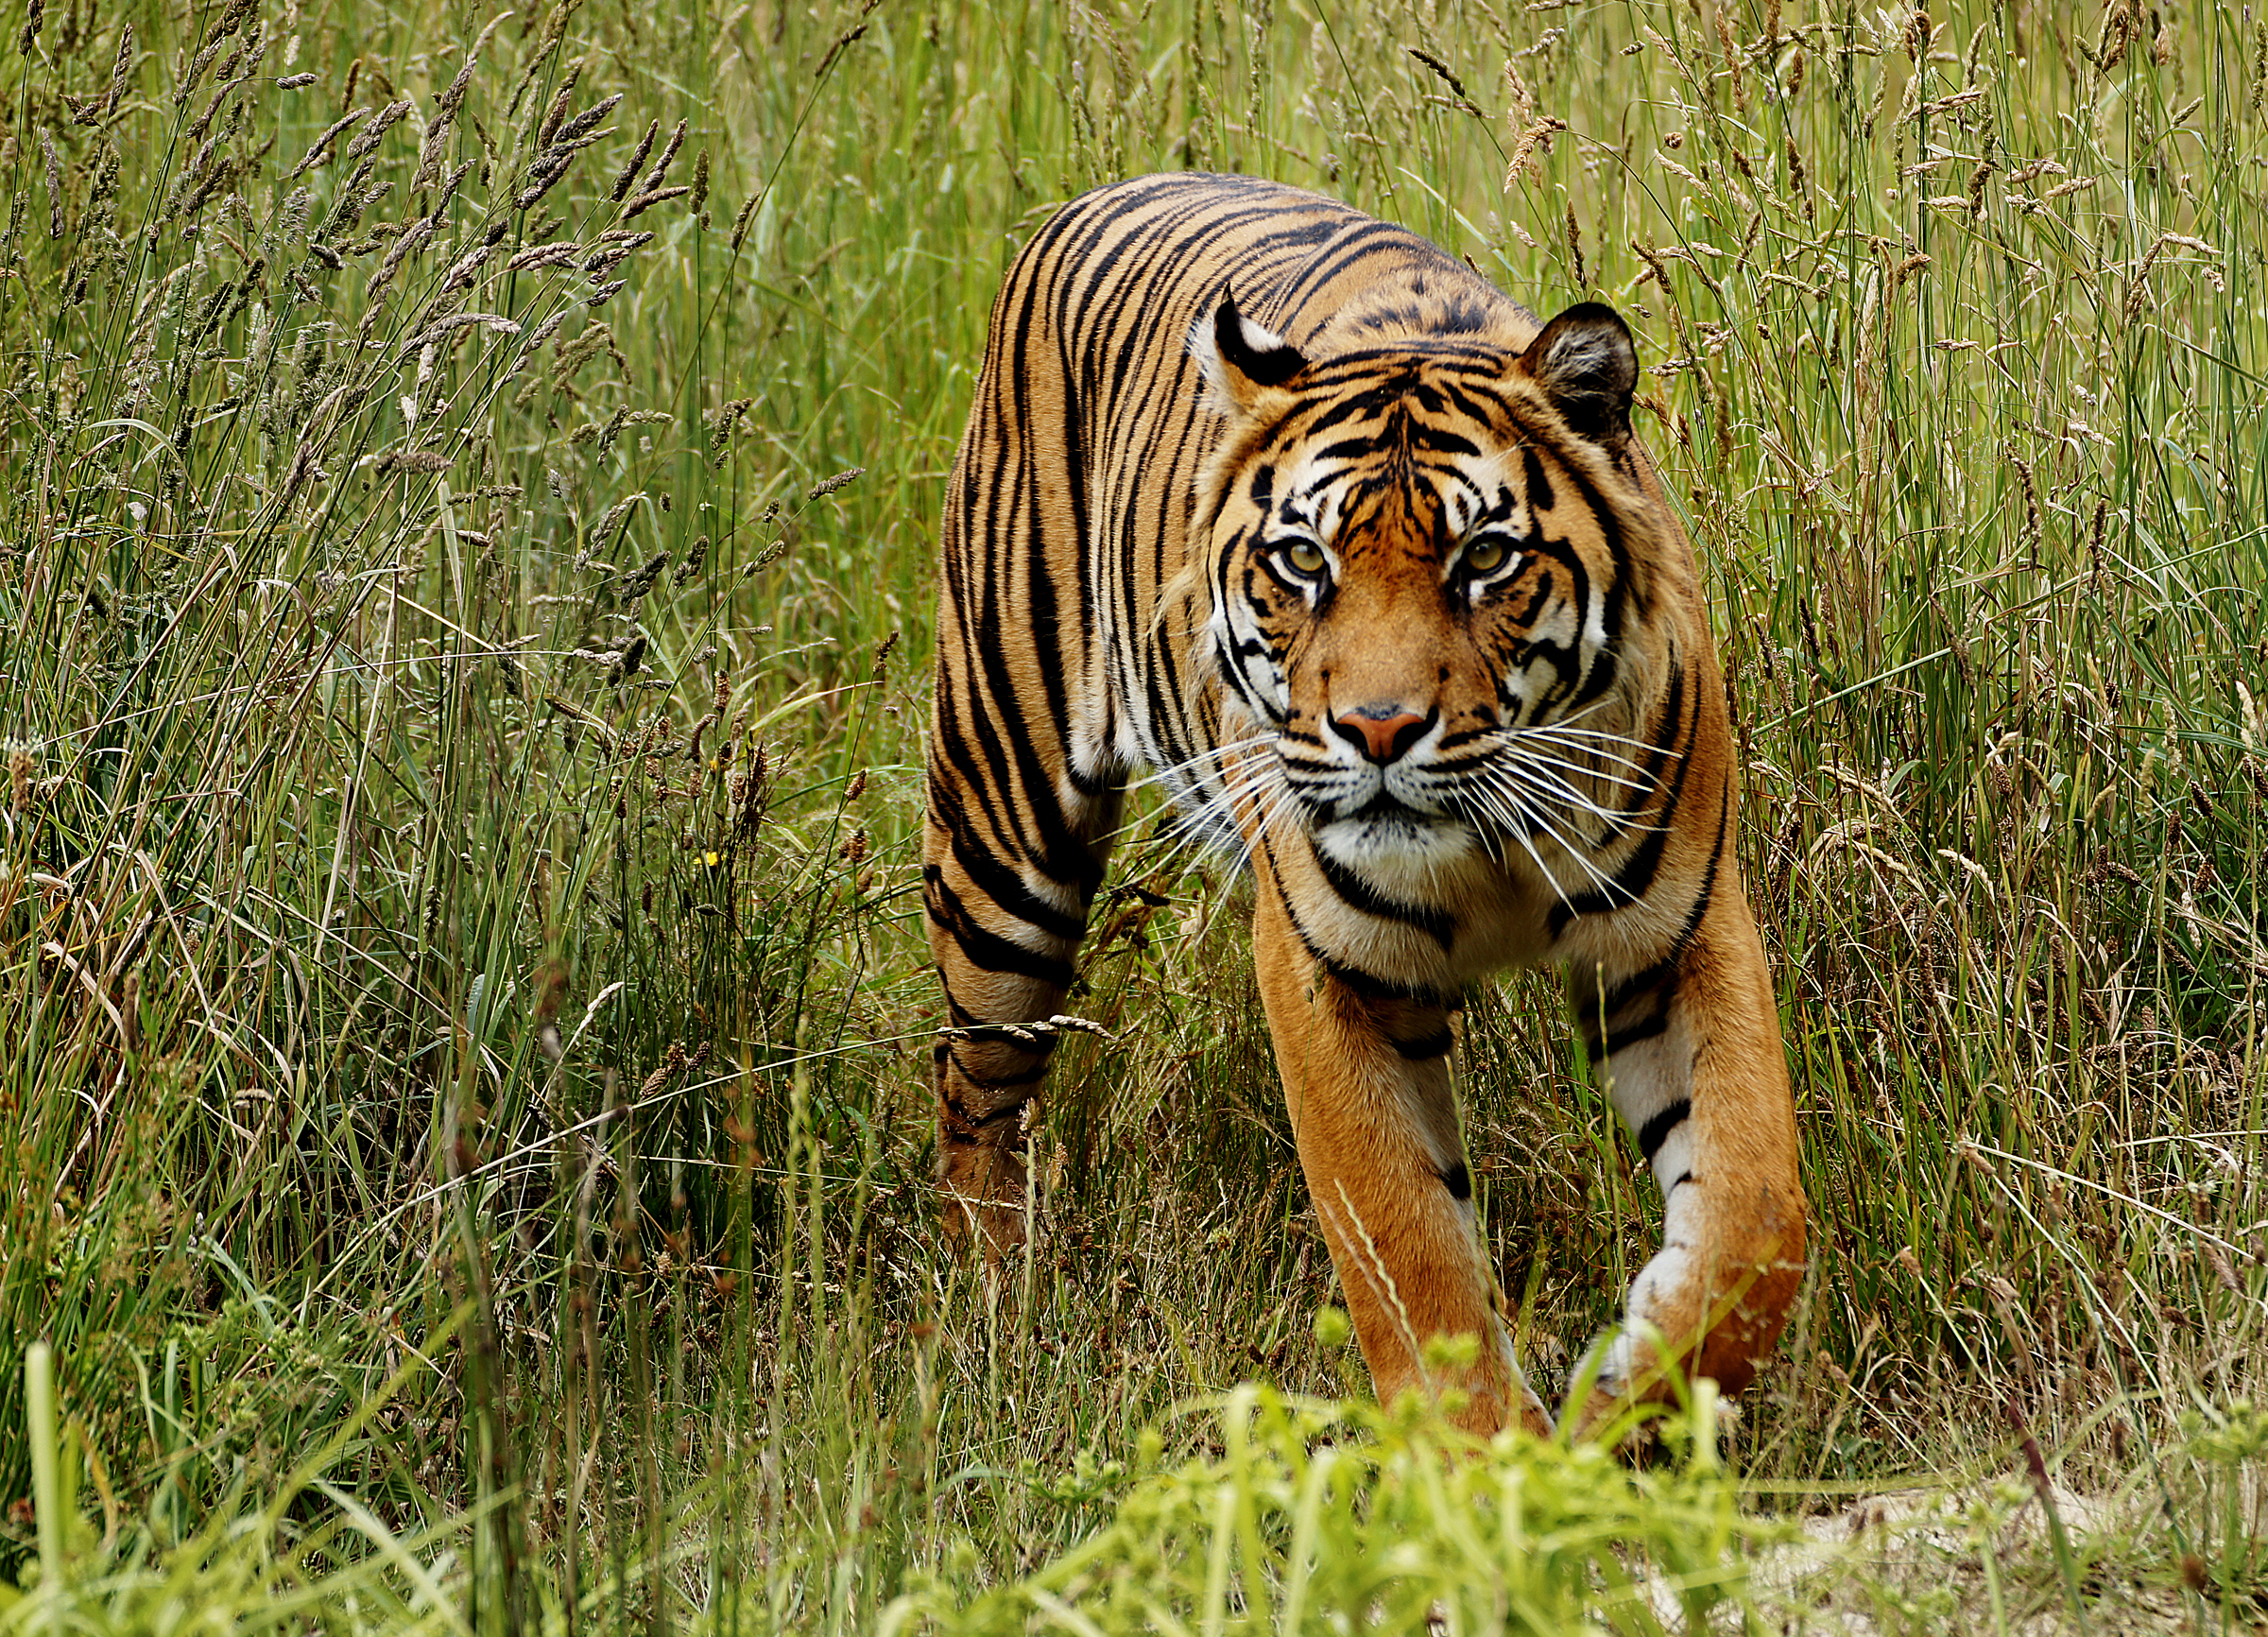 A Sumatran tiger, an endangered species from Indonesia